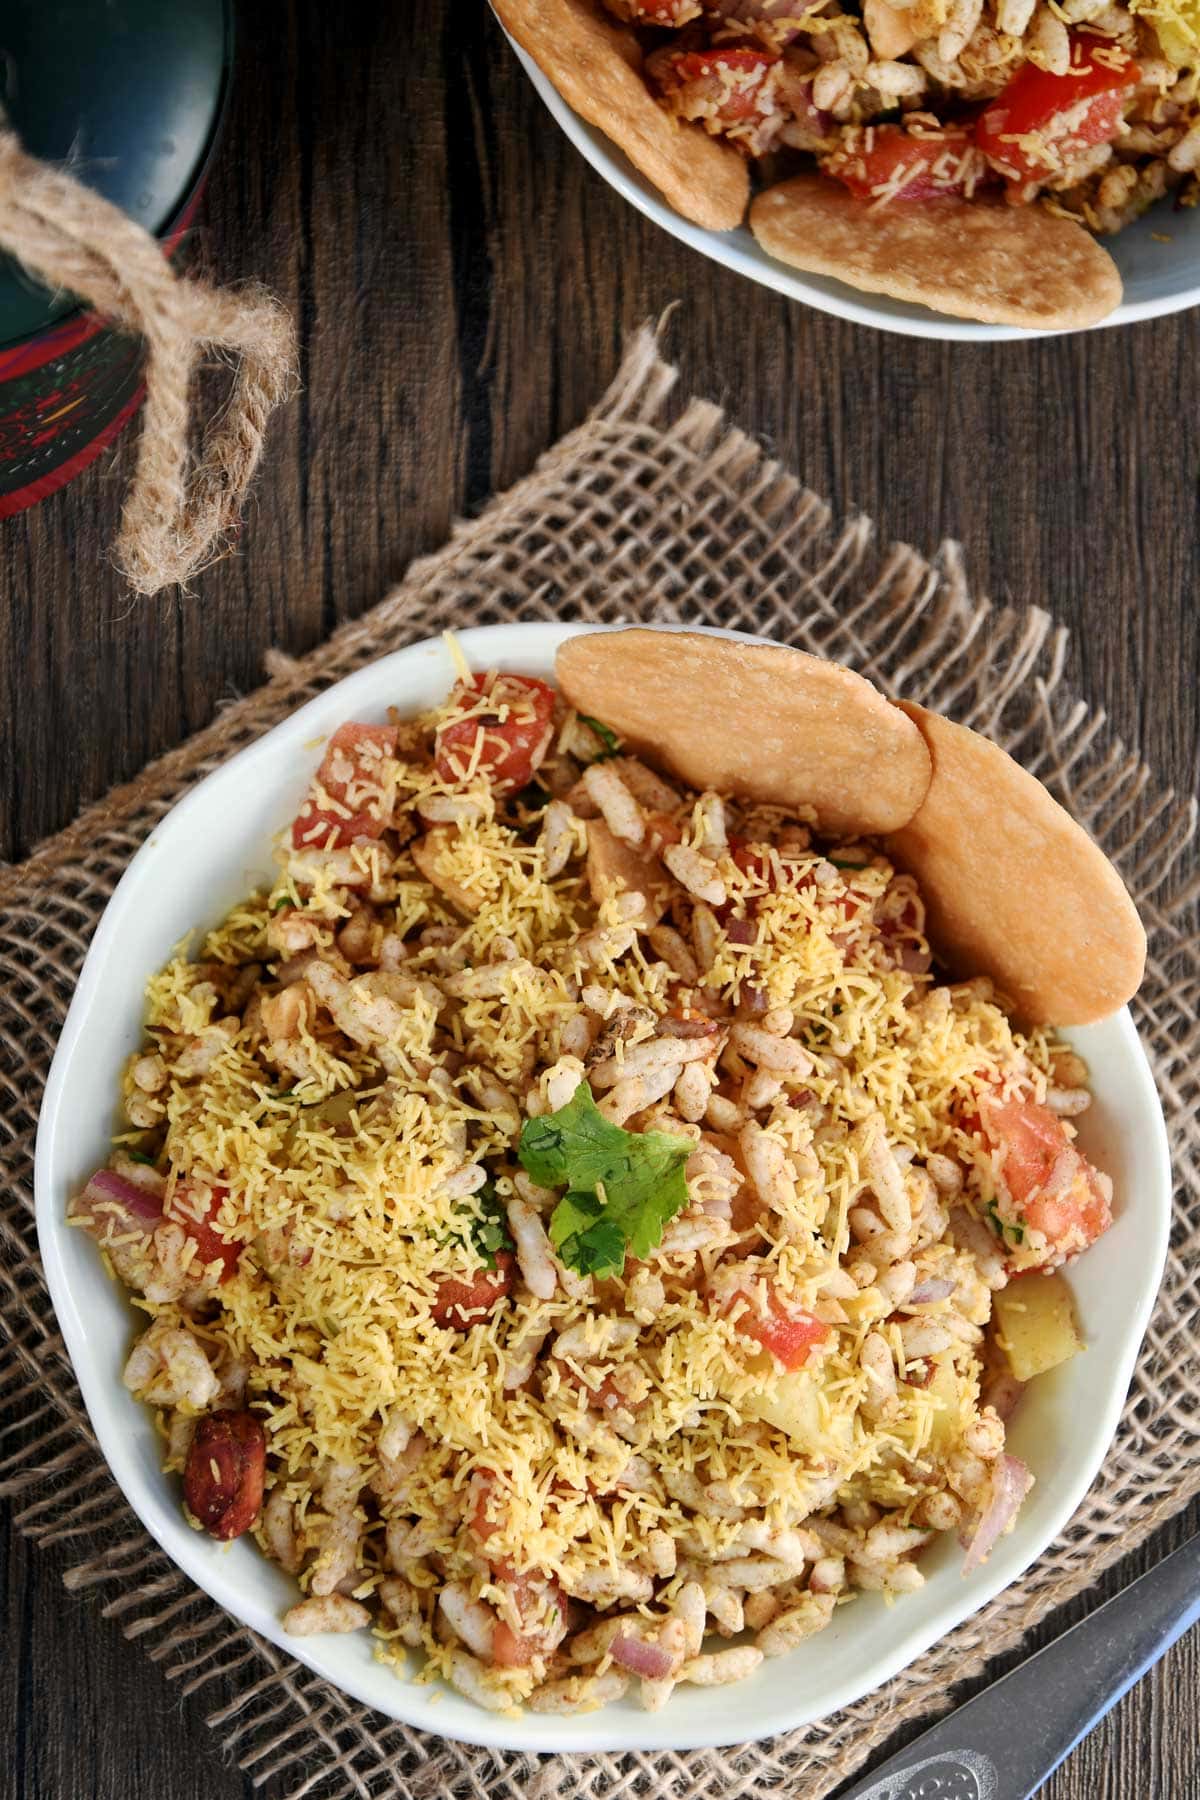 Bhel puri served in a bowl.